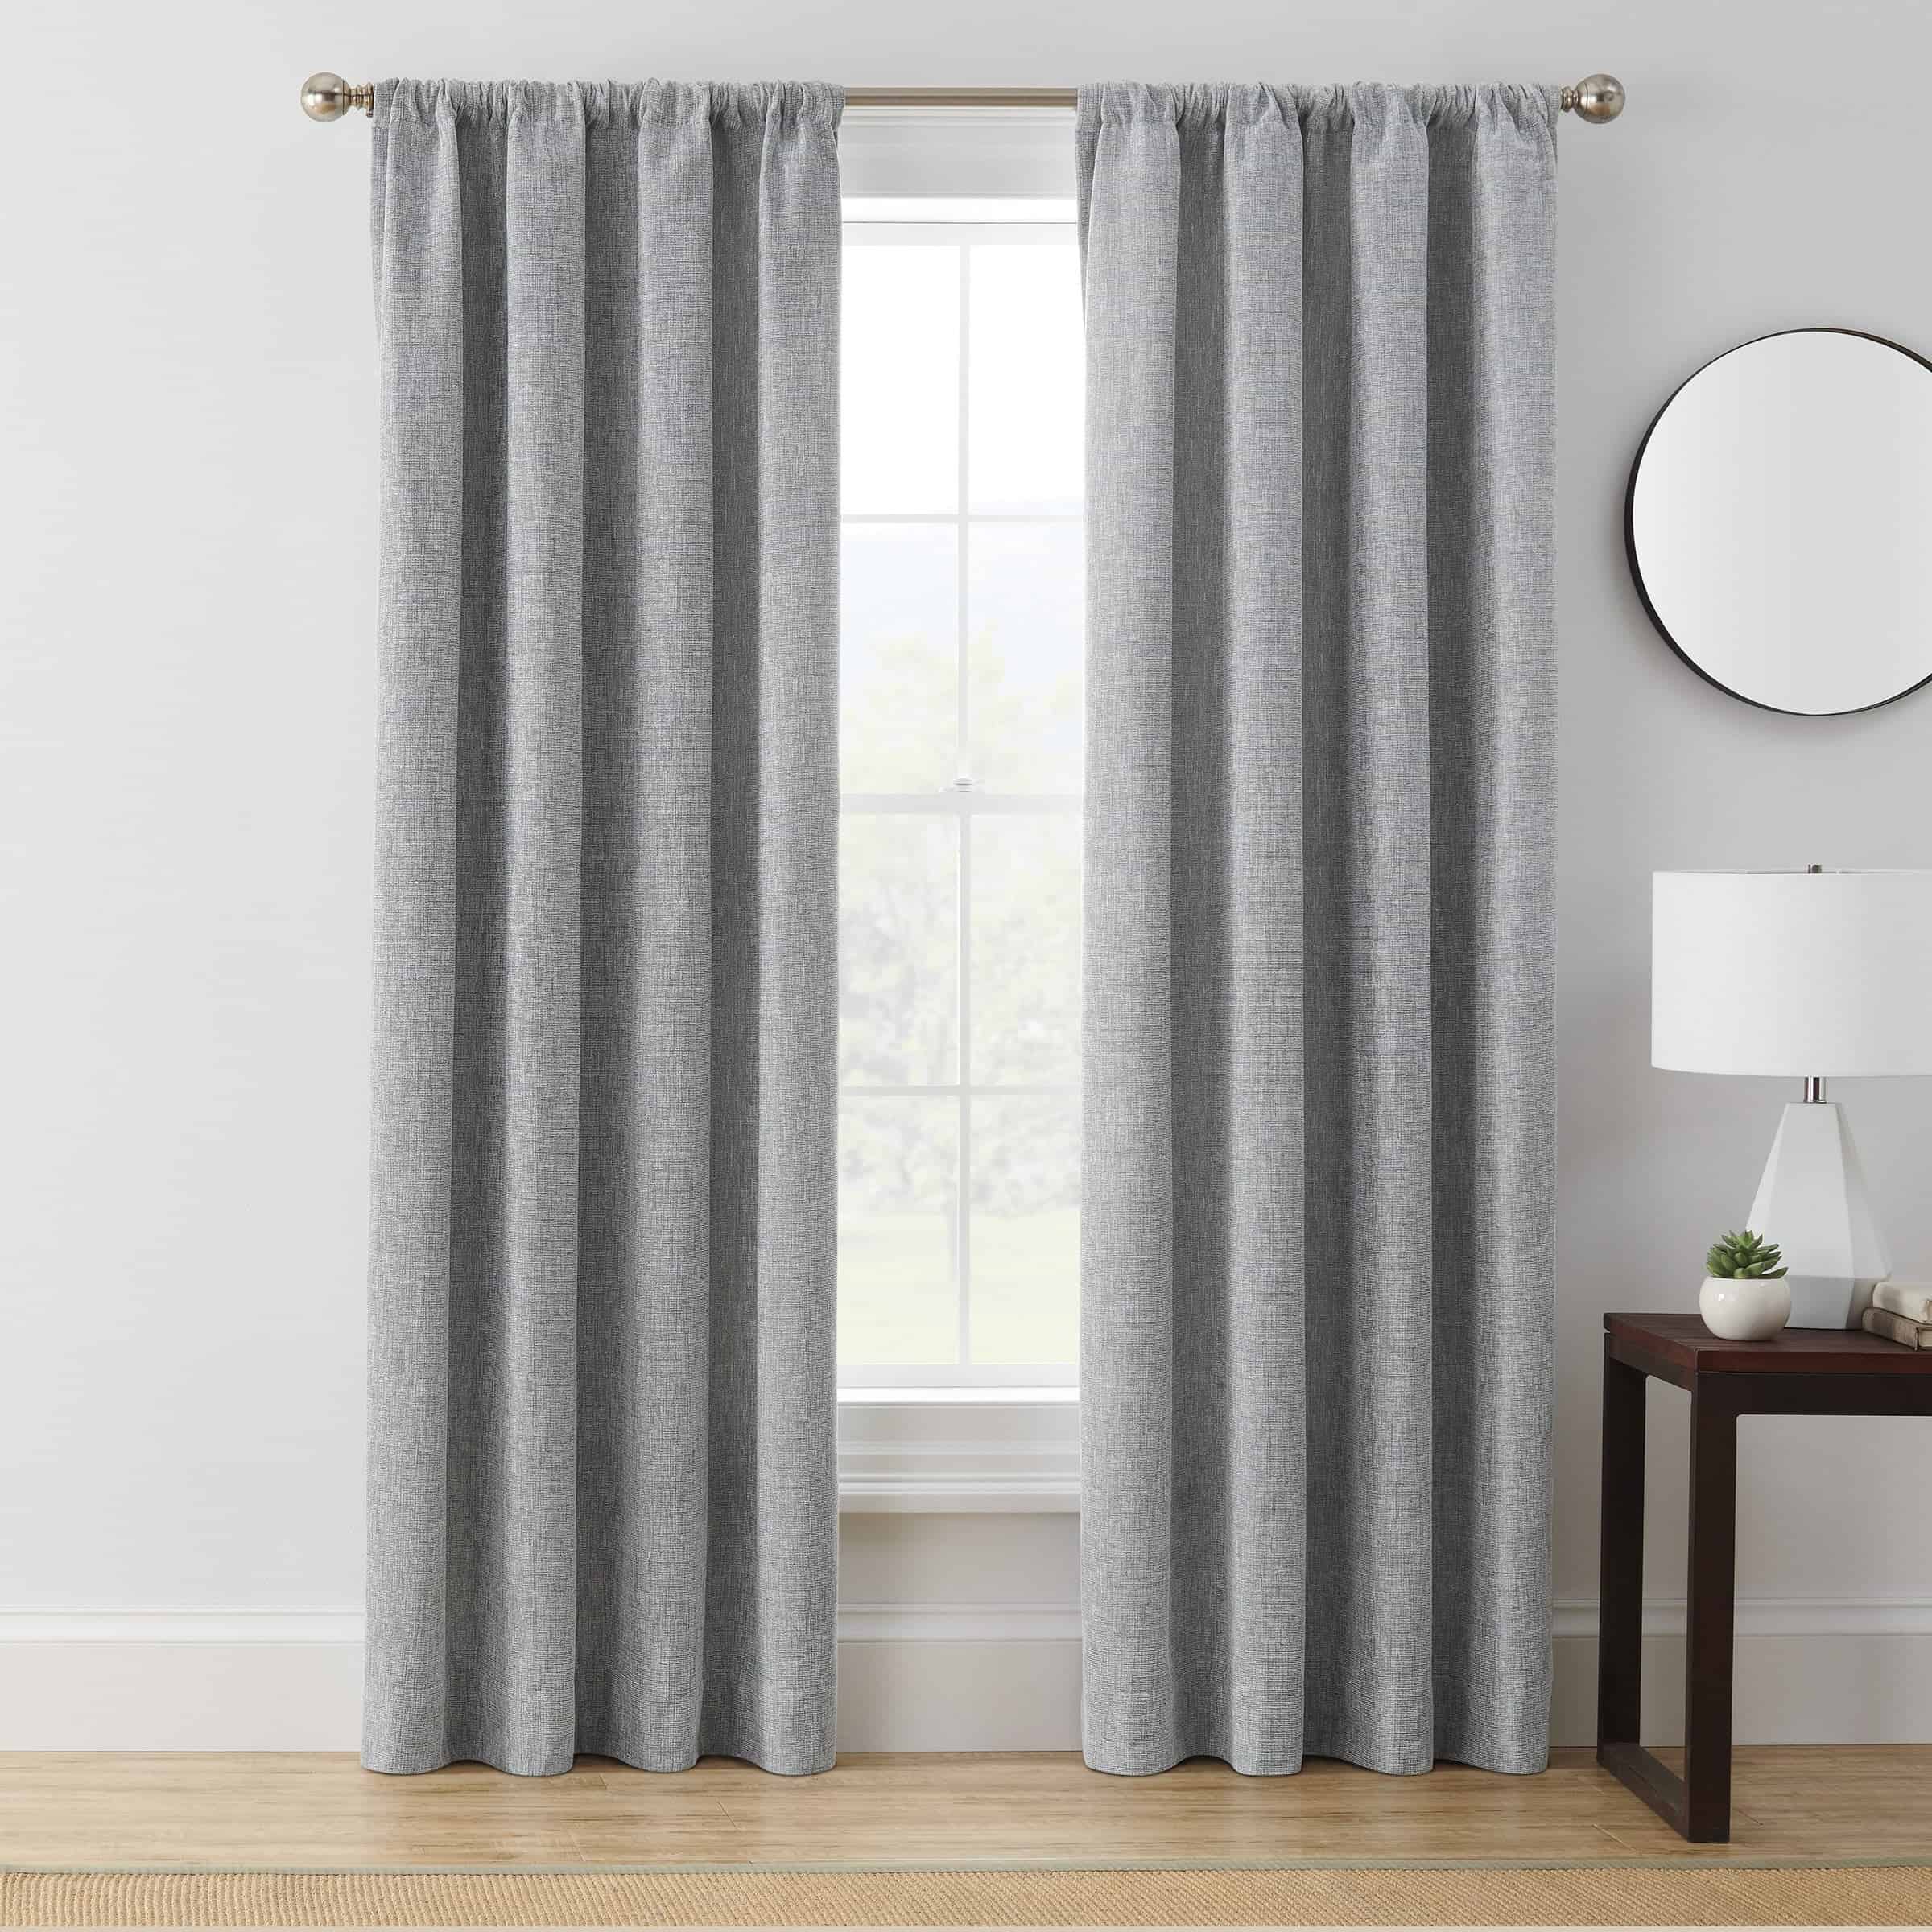 Gray Curtains Are Great Against White Walls